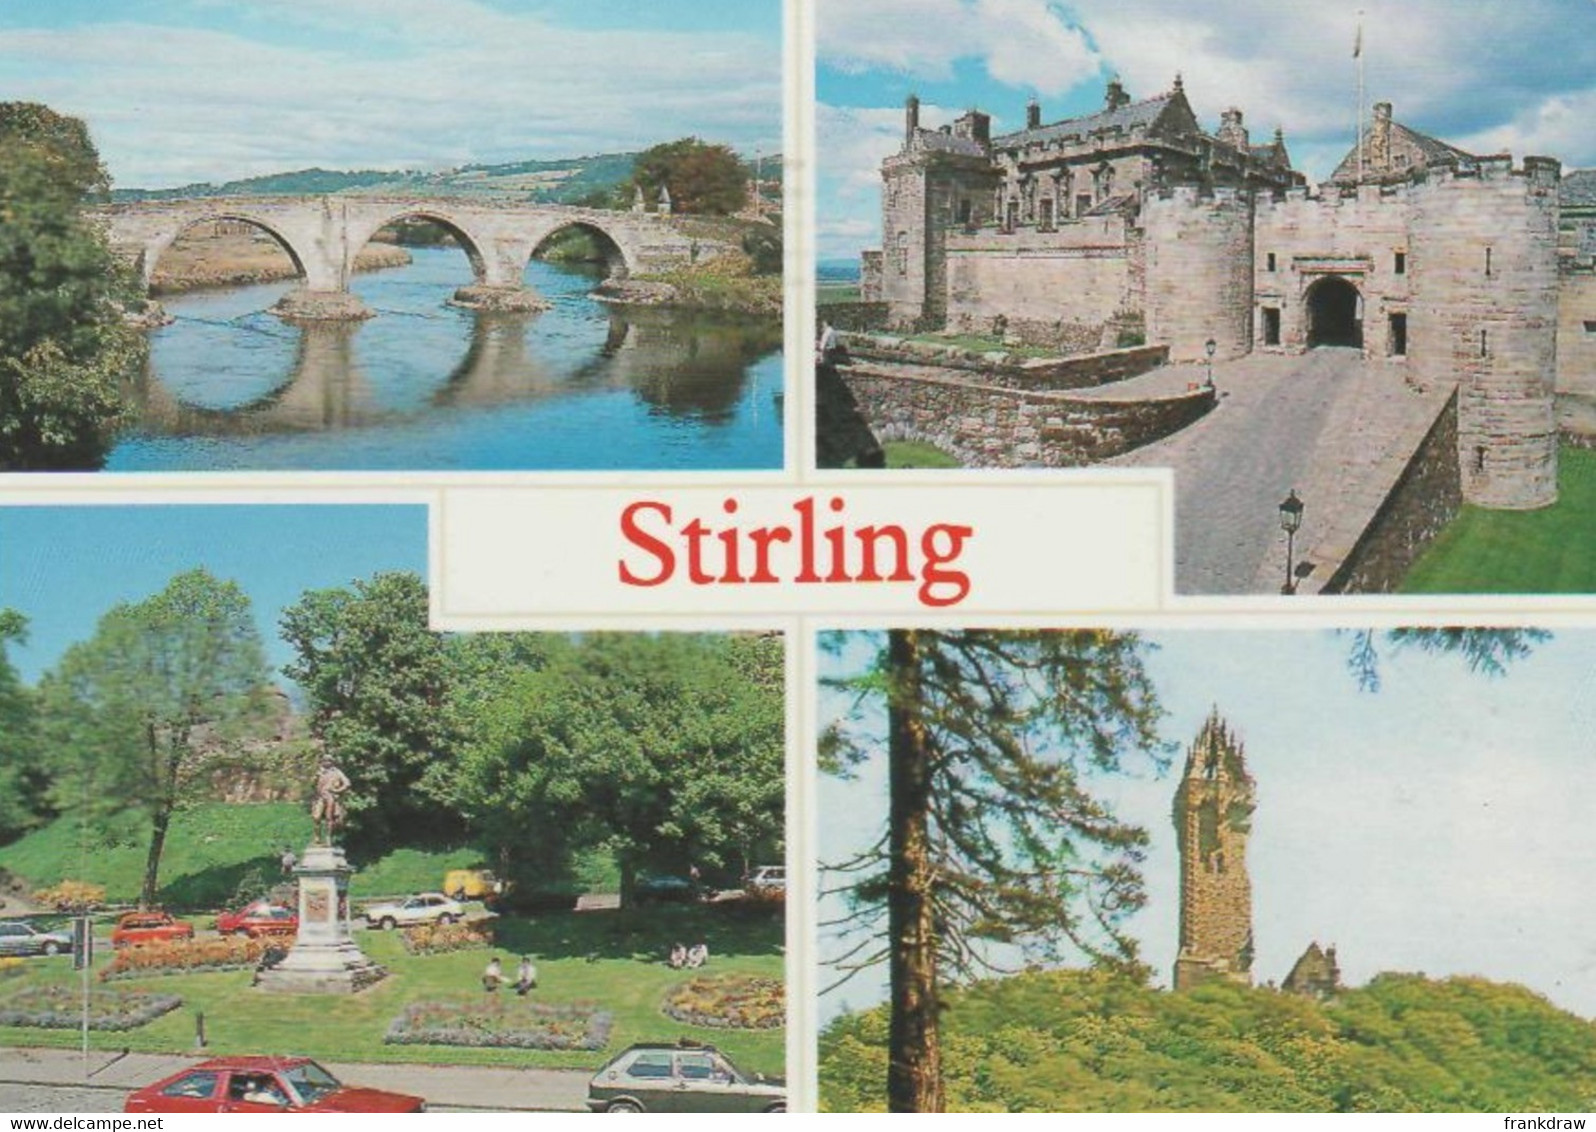 Postcard - Stirling - 4 Views - Card No.8511 - Posted 07-09-1996 - VG - Unclassified